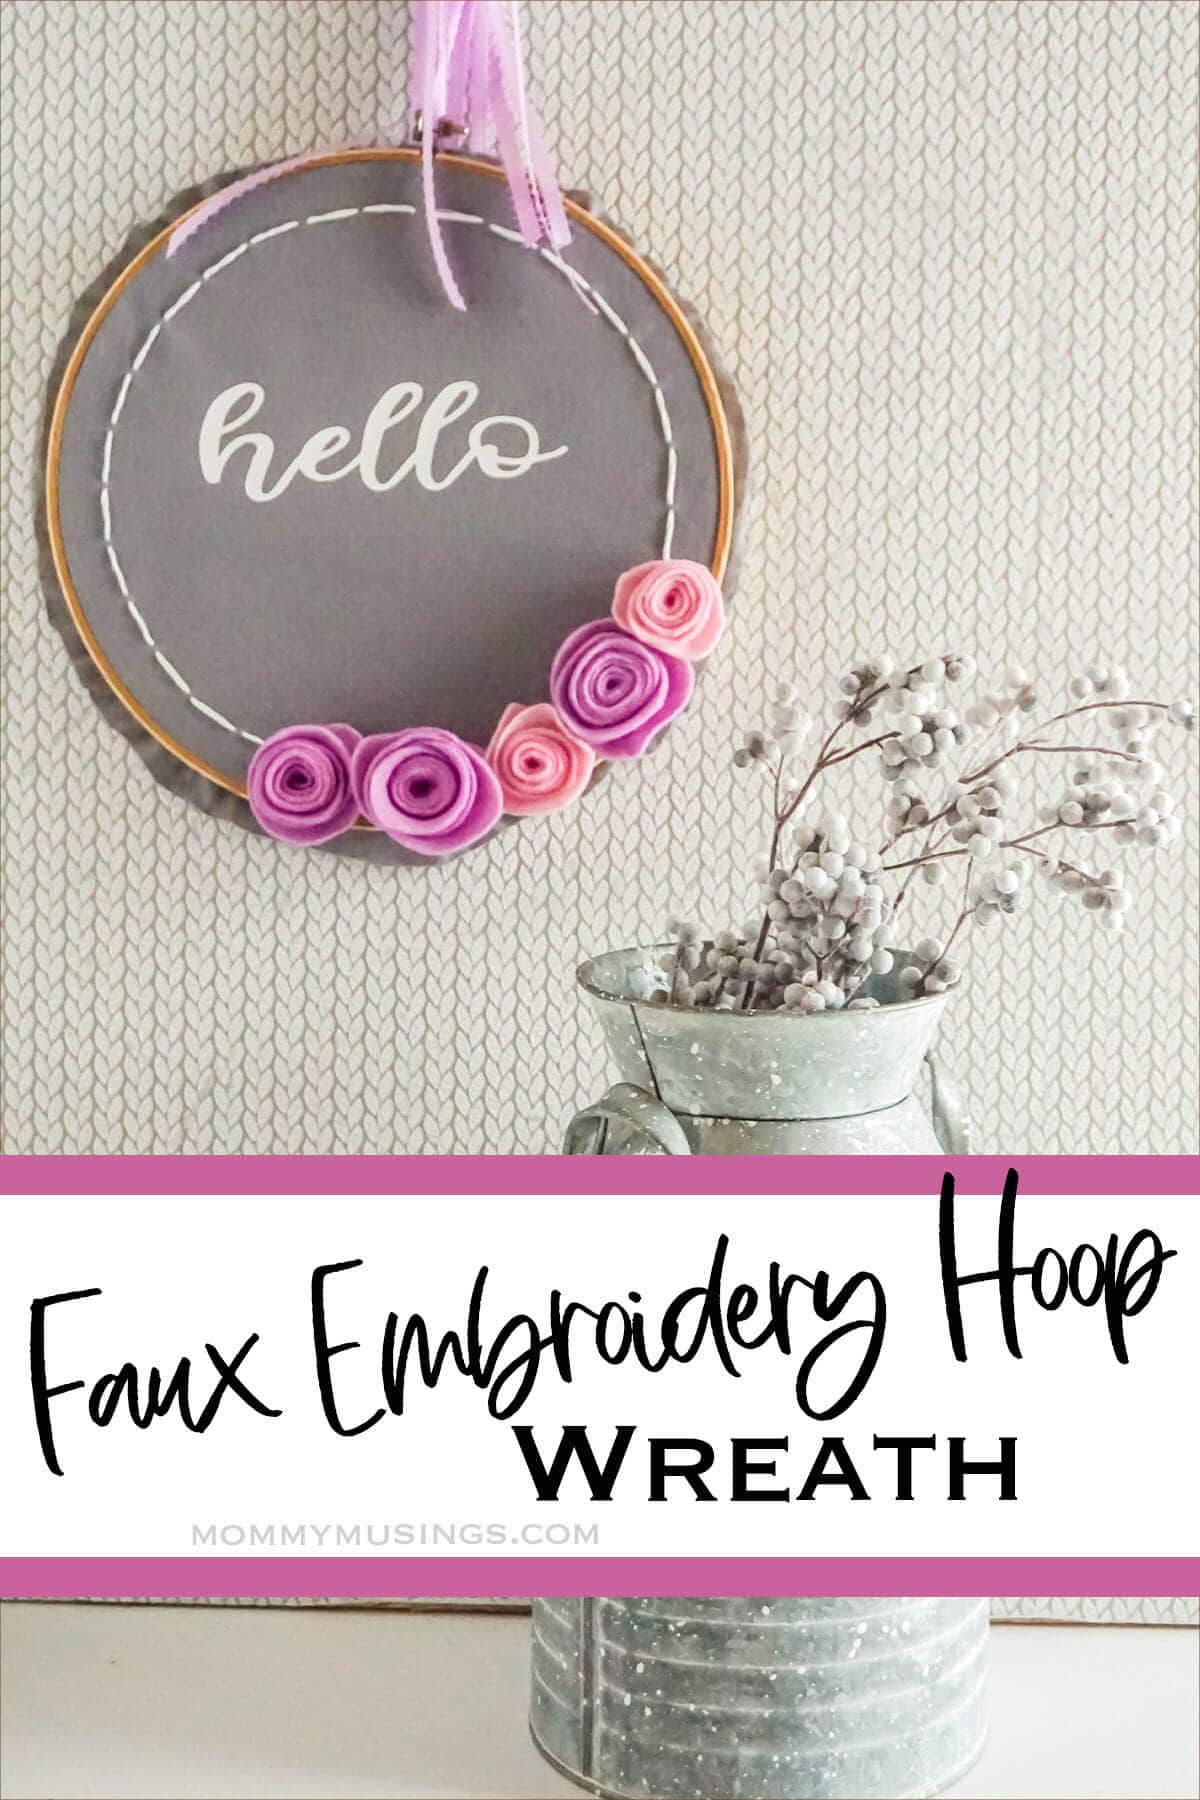 easy cricut craft wreath idea with text which reads faux embroidery hoop wreath